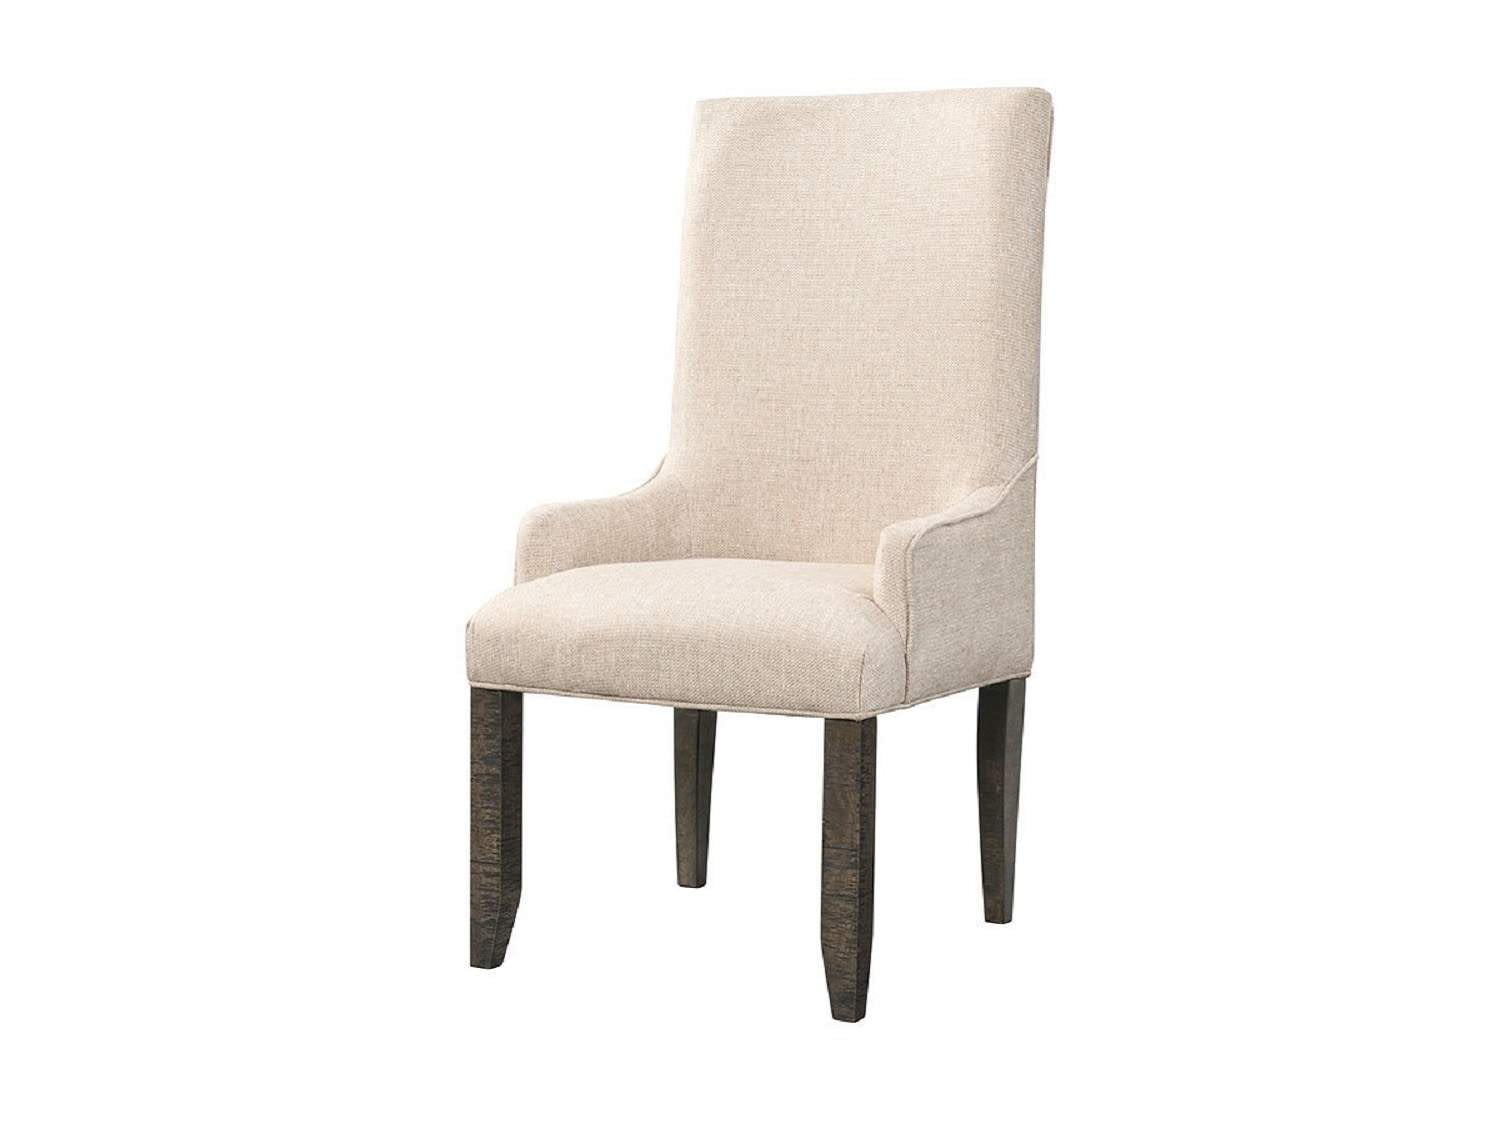 BRIER Upholstered Chair